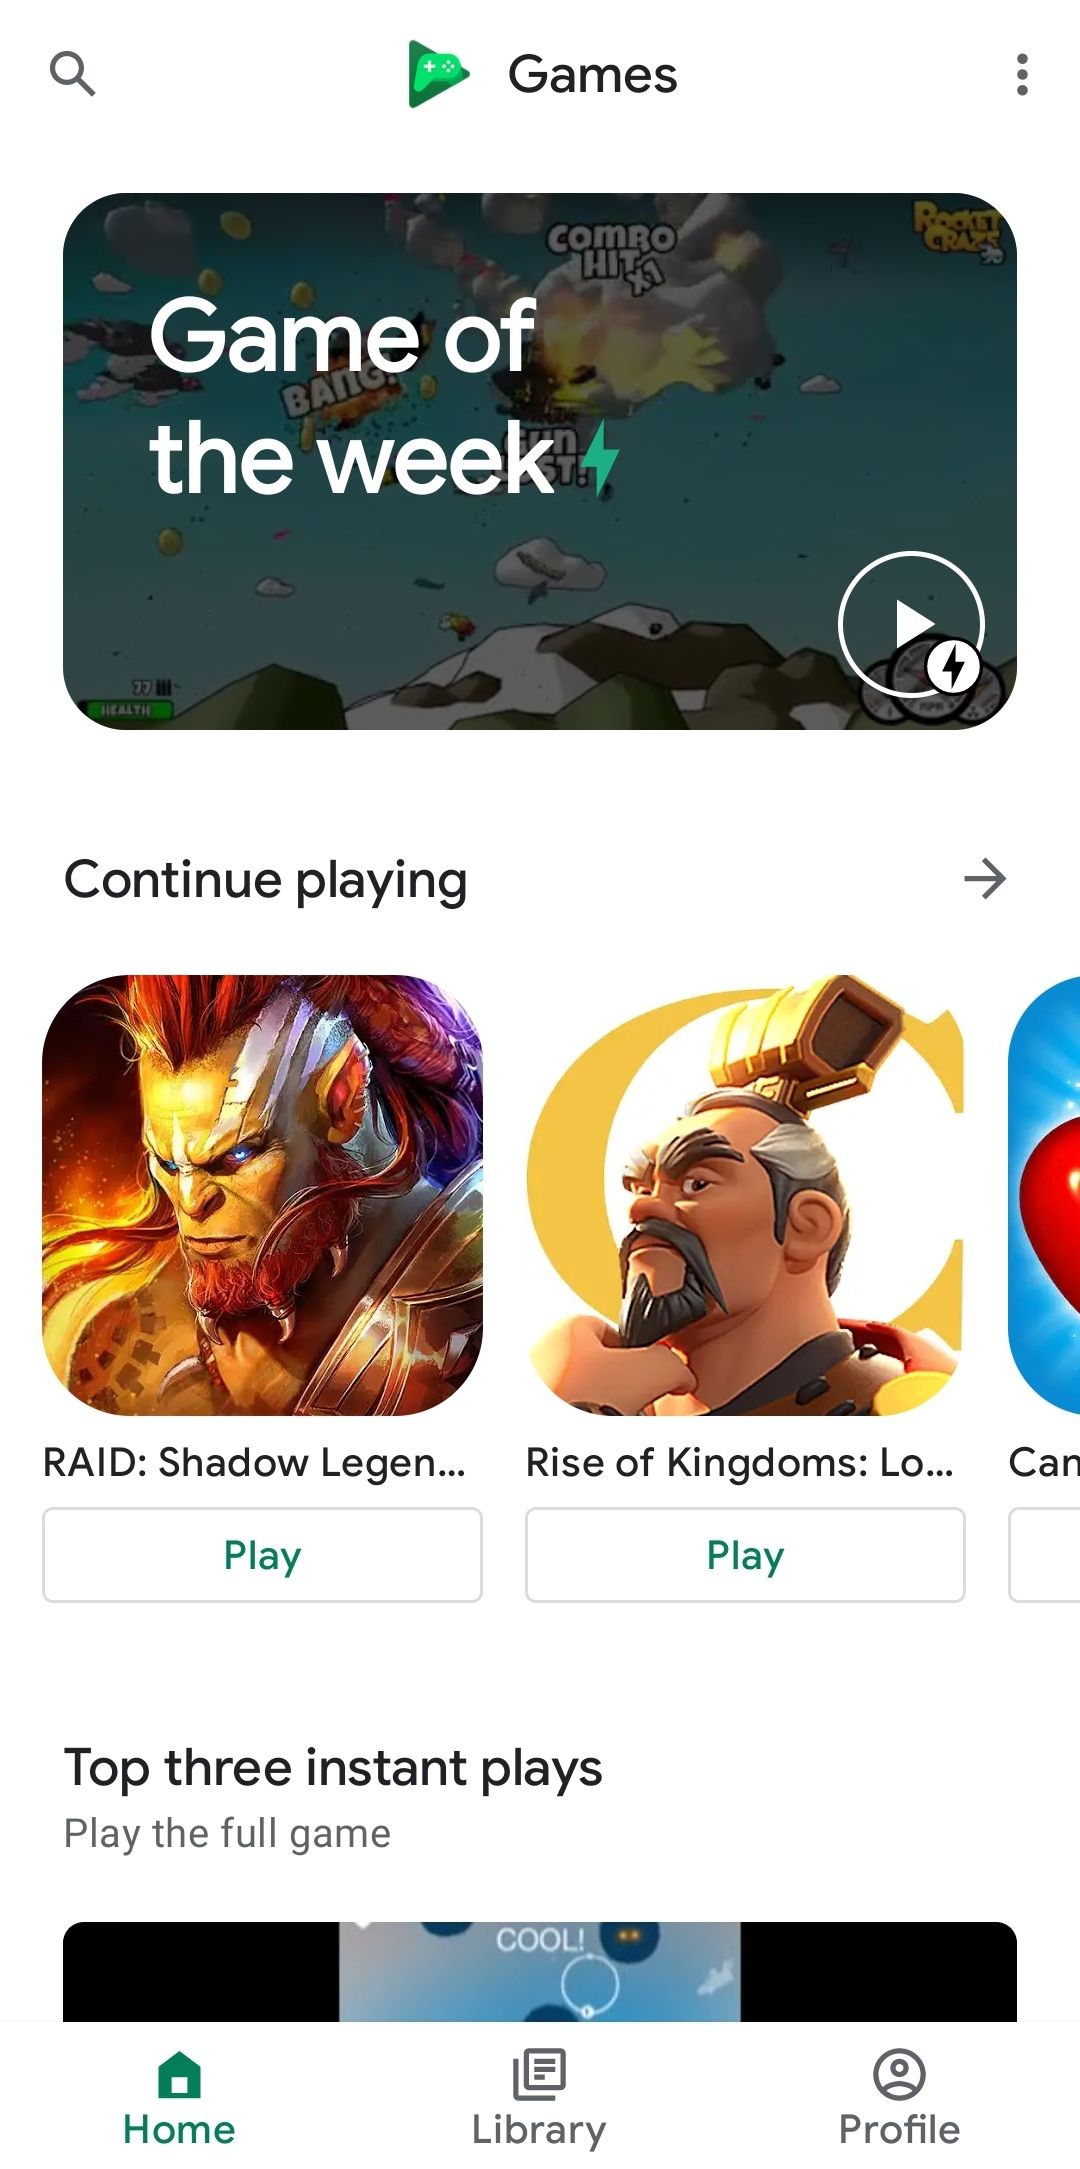 the homescreen of Google play games